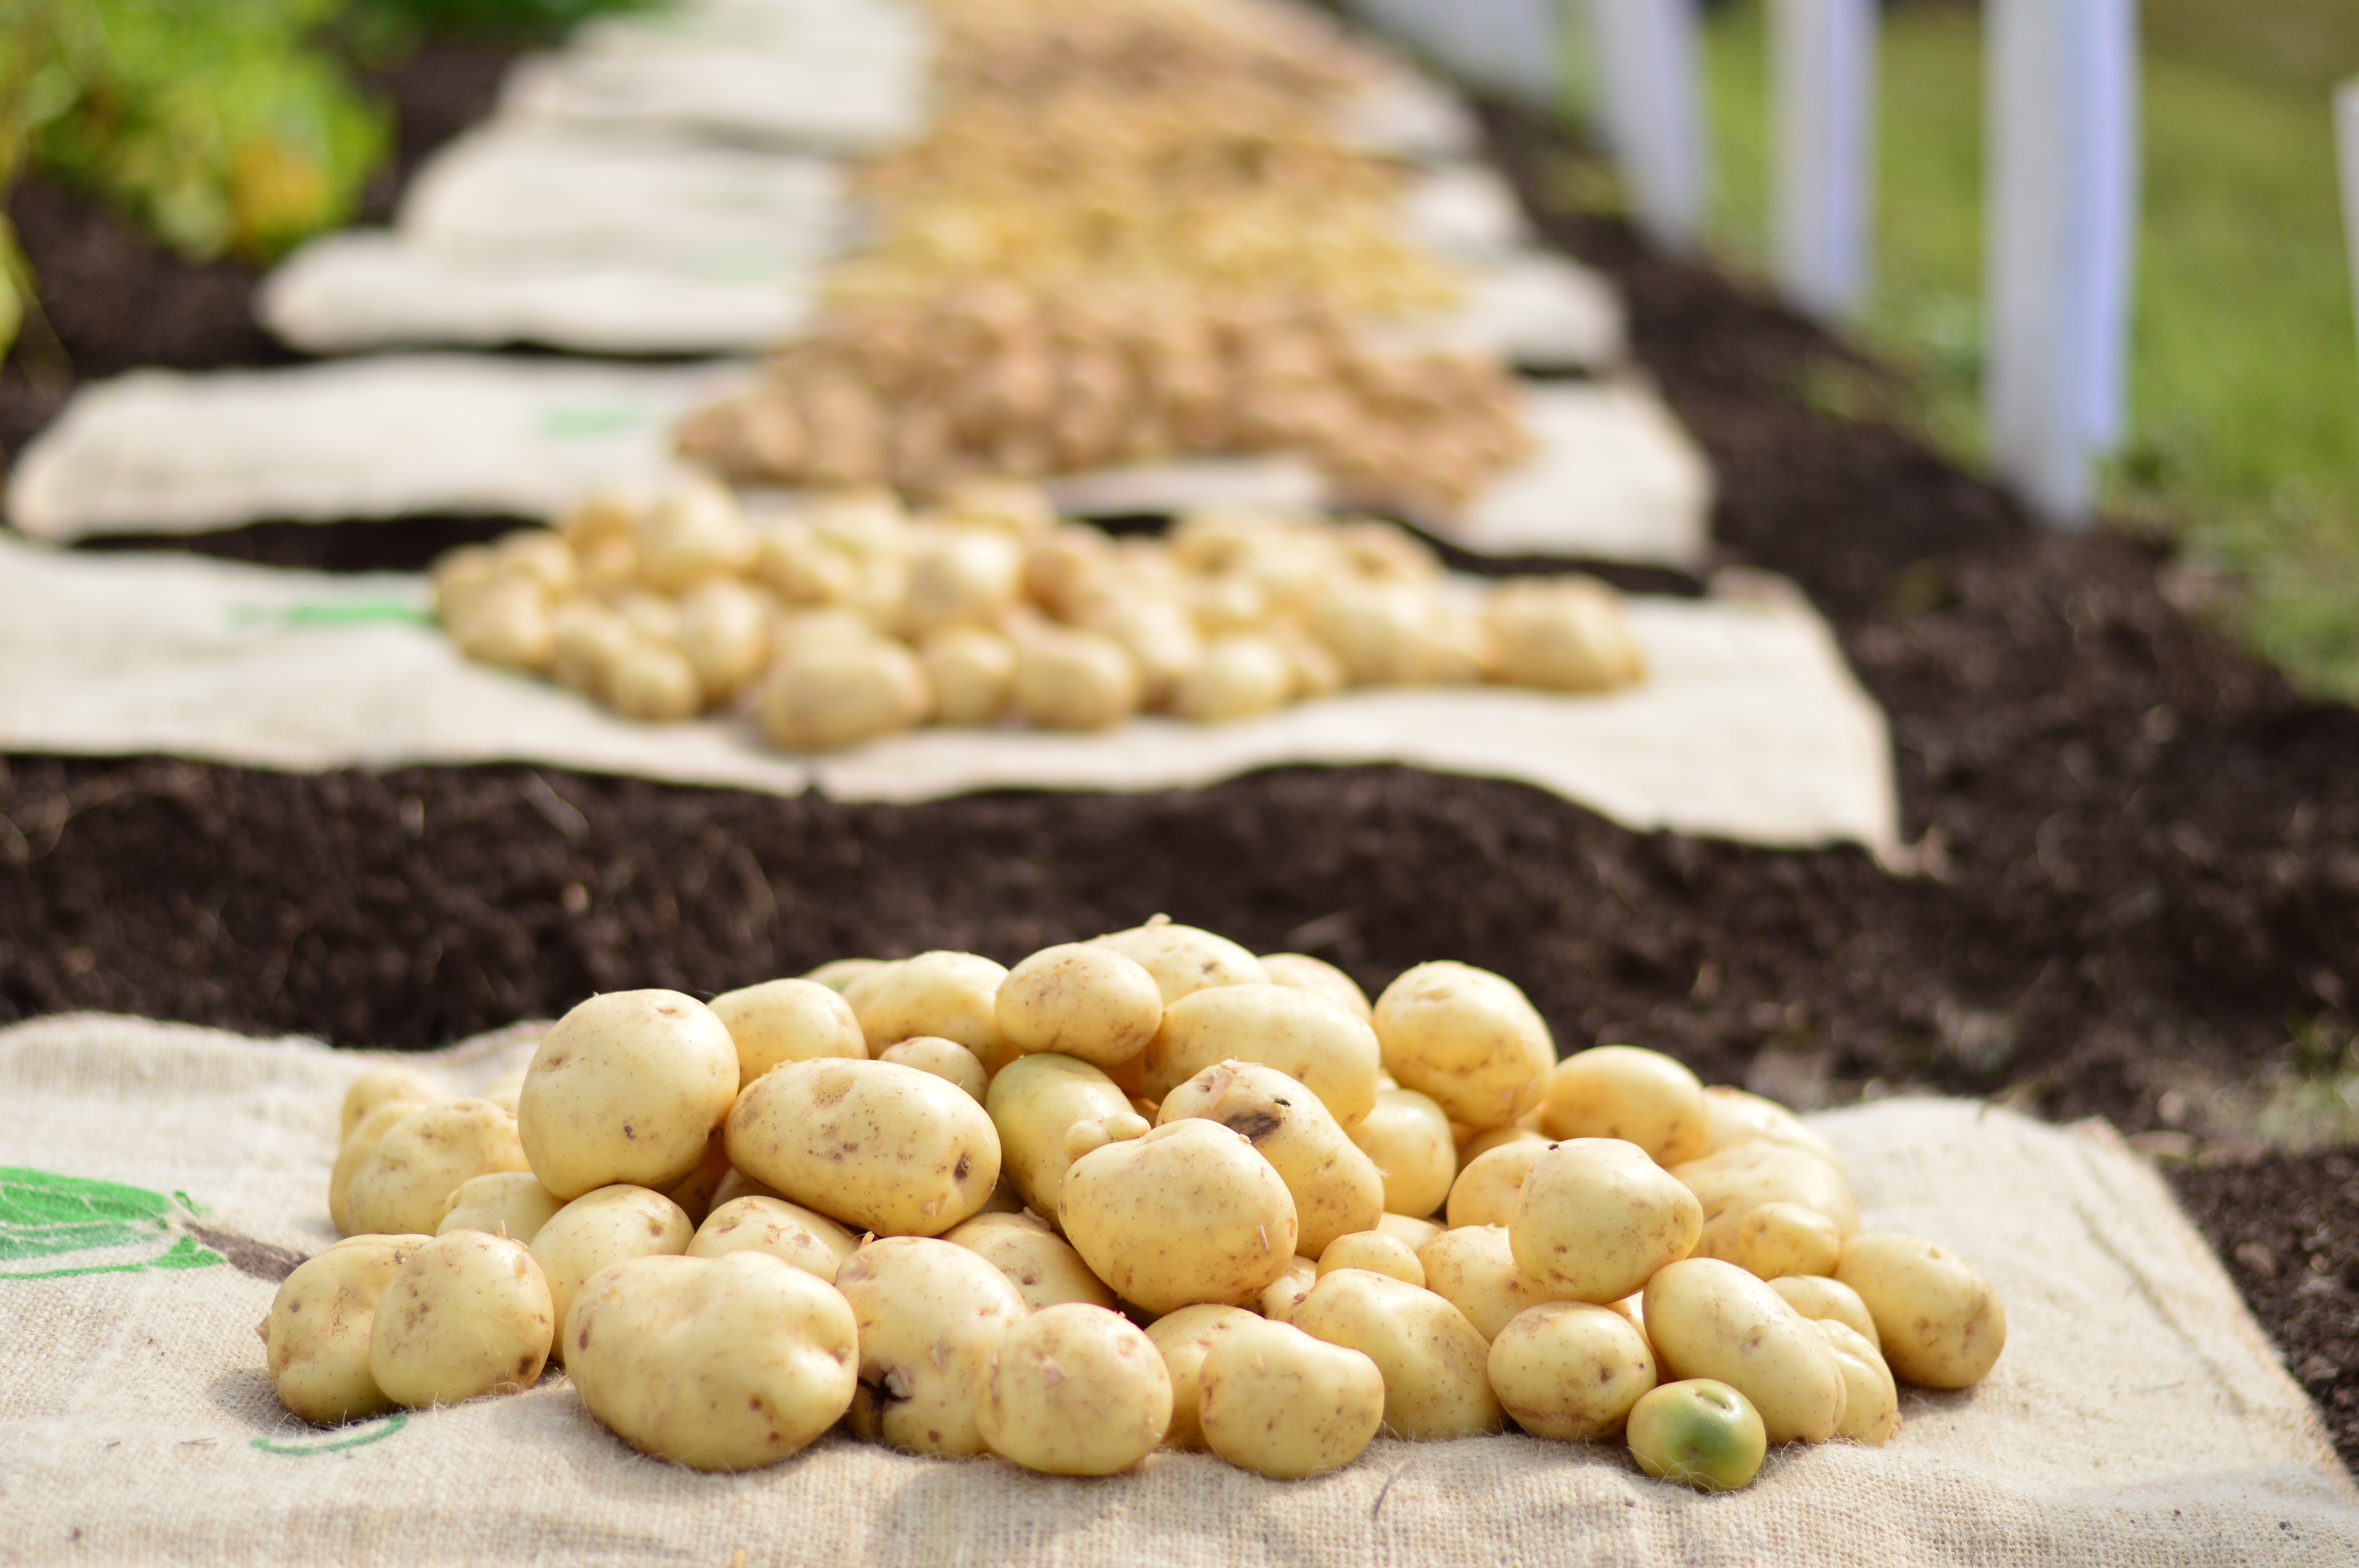 Potatoes on the ground at Potatoes in Practice 2021